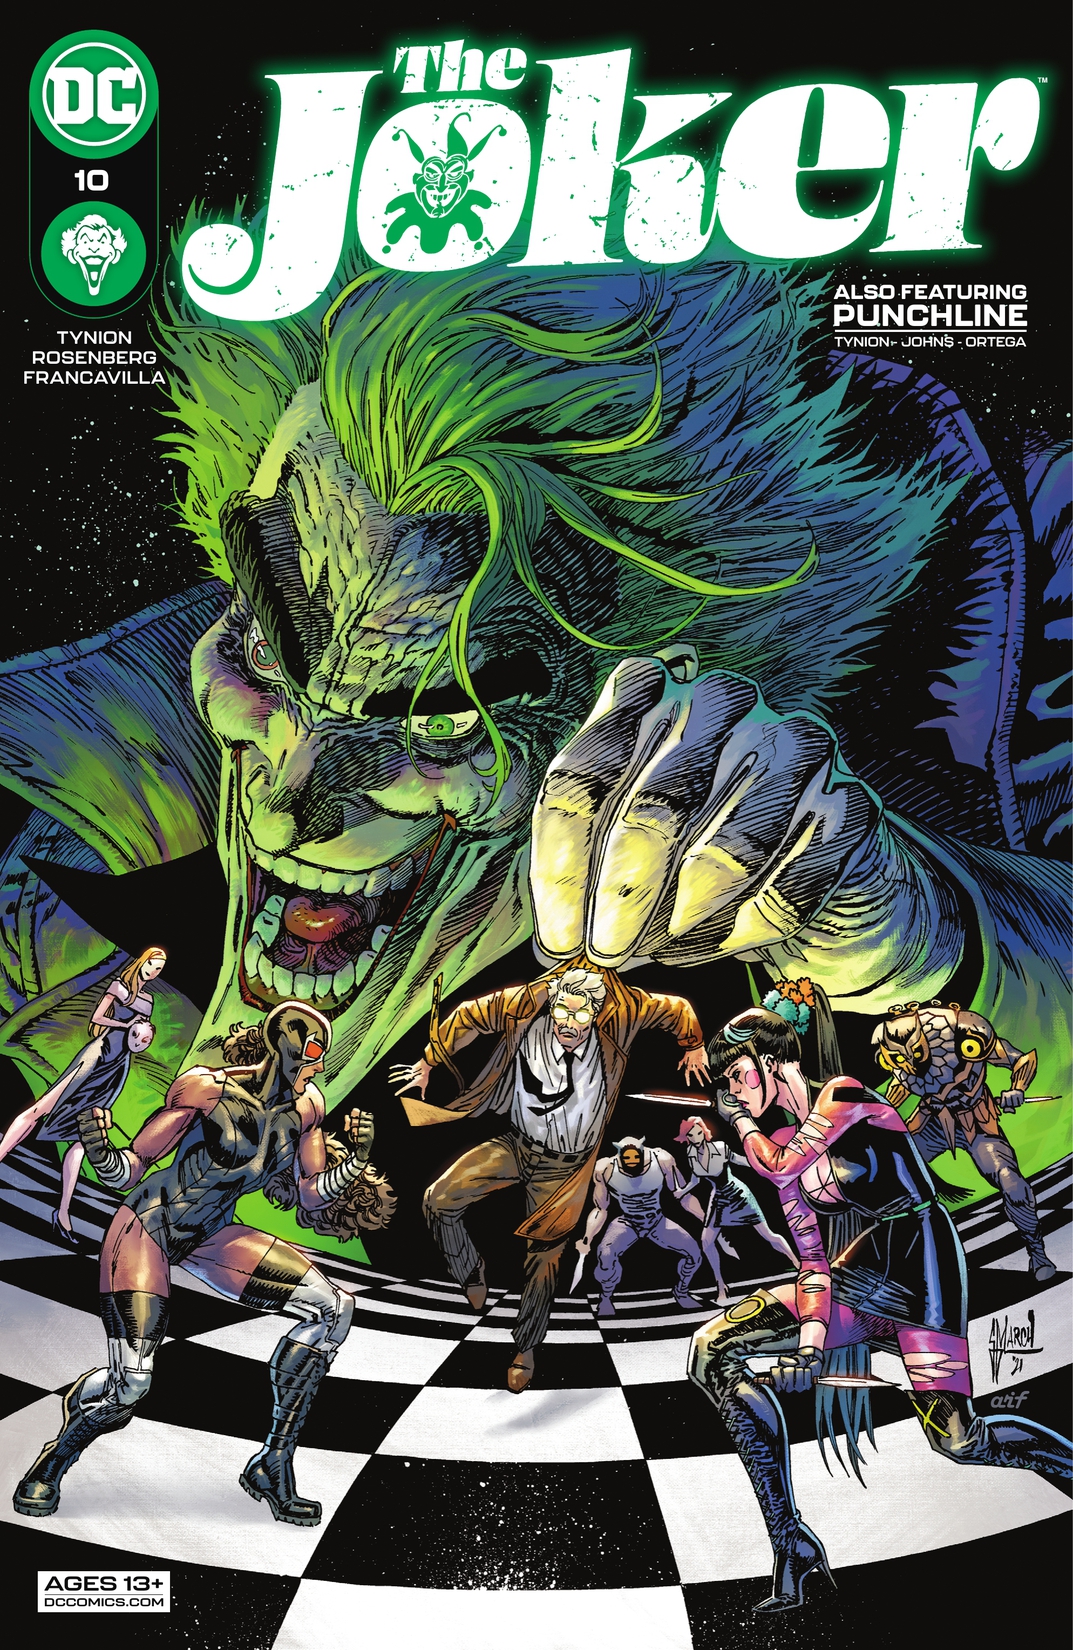 The Joker #10 preview images